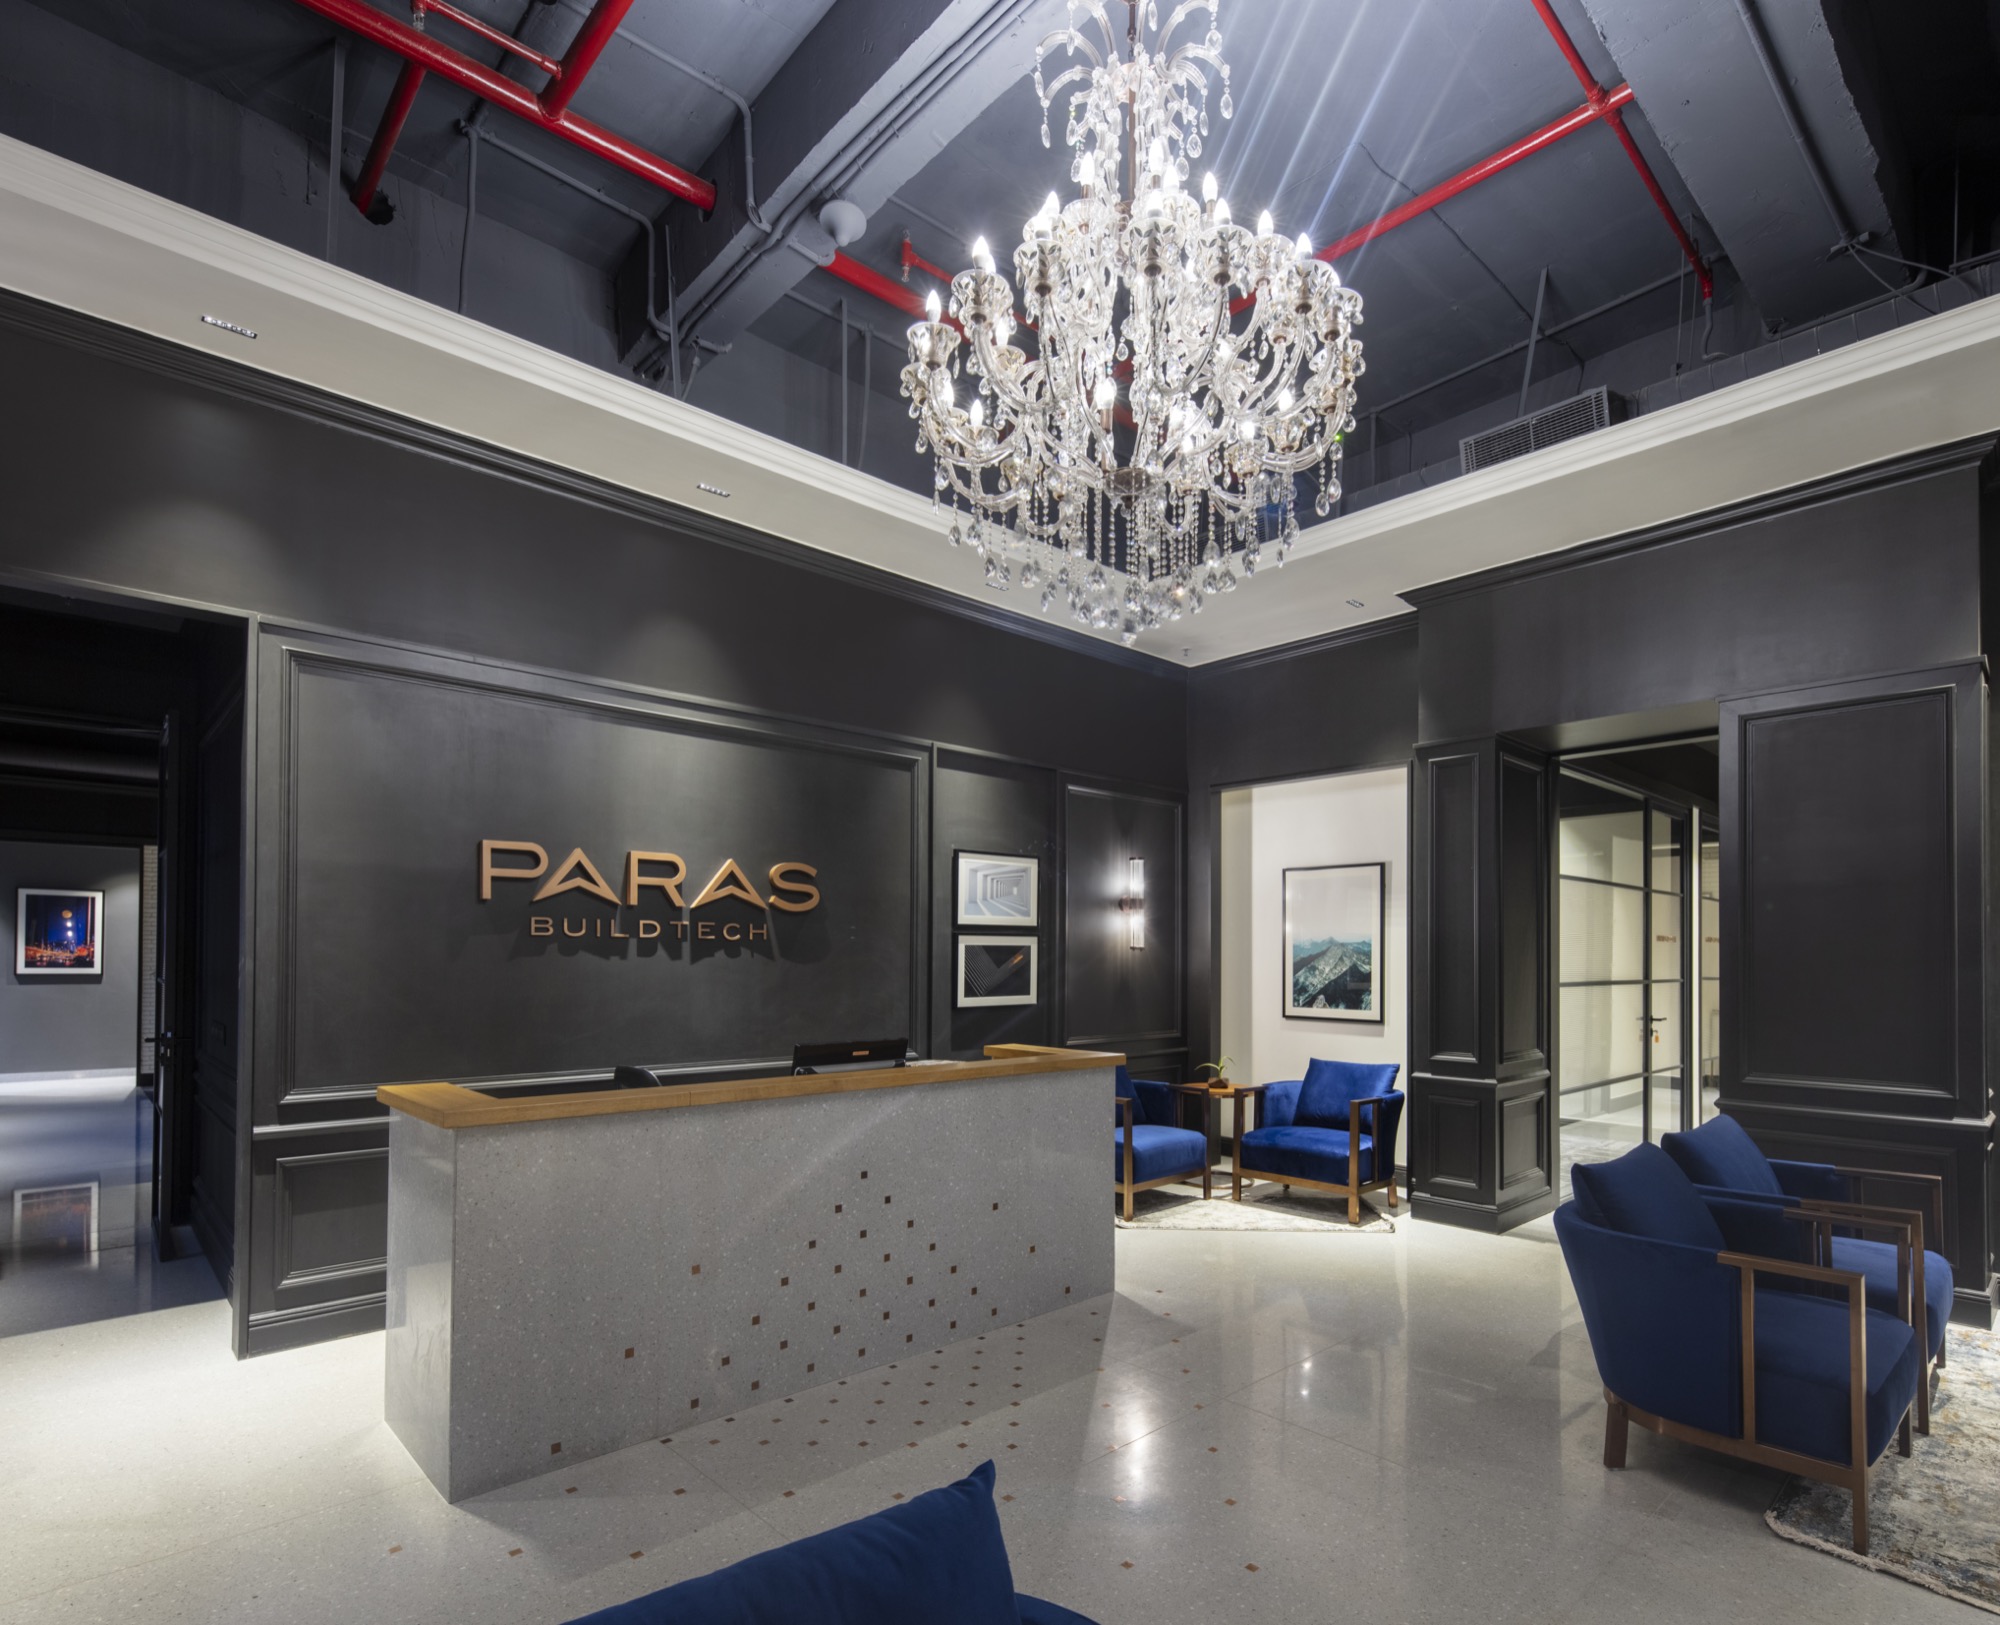 Office for Paras Buildtech at Gurugram, by groupDCA 61